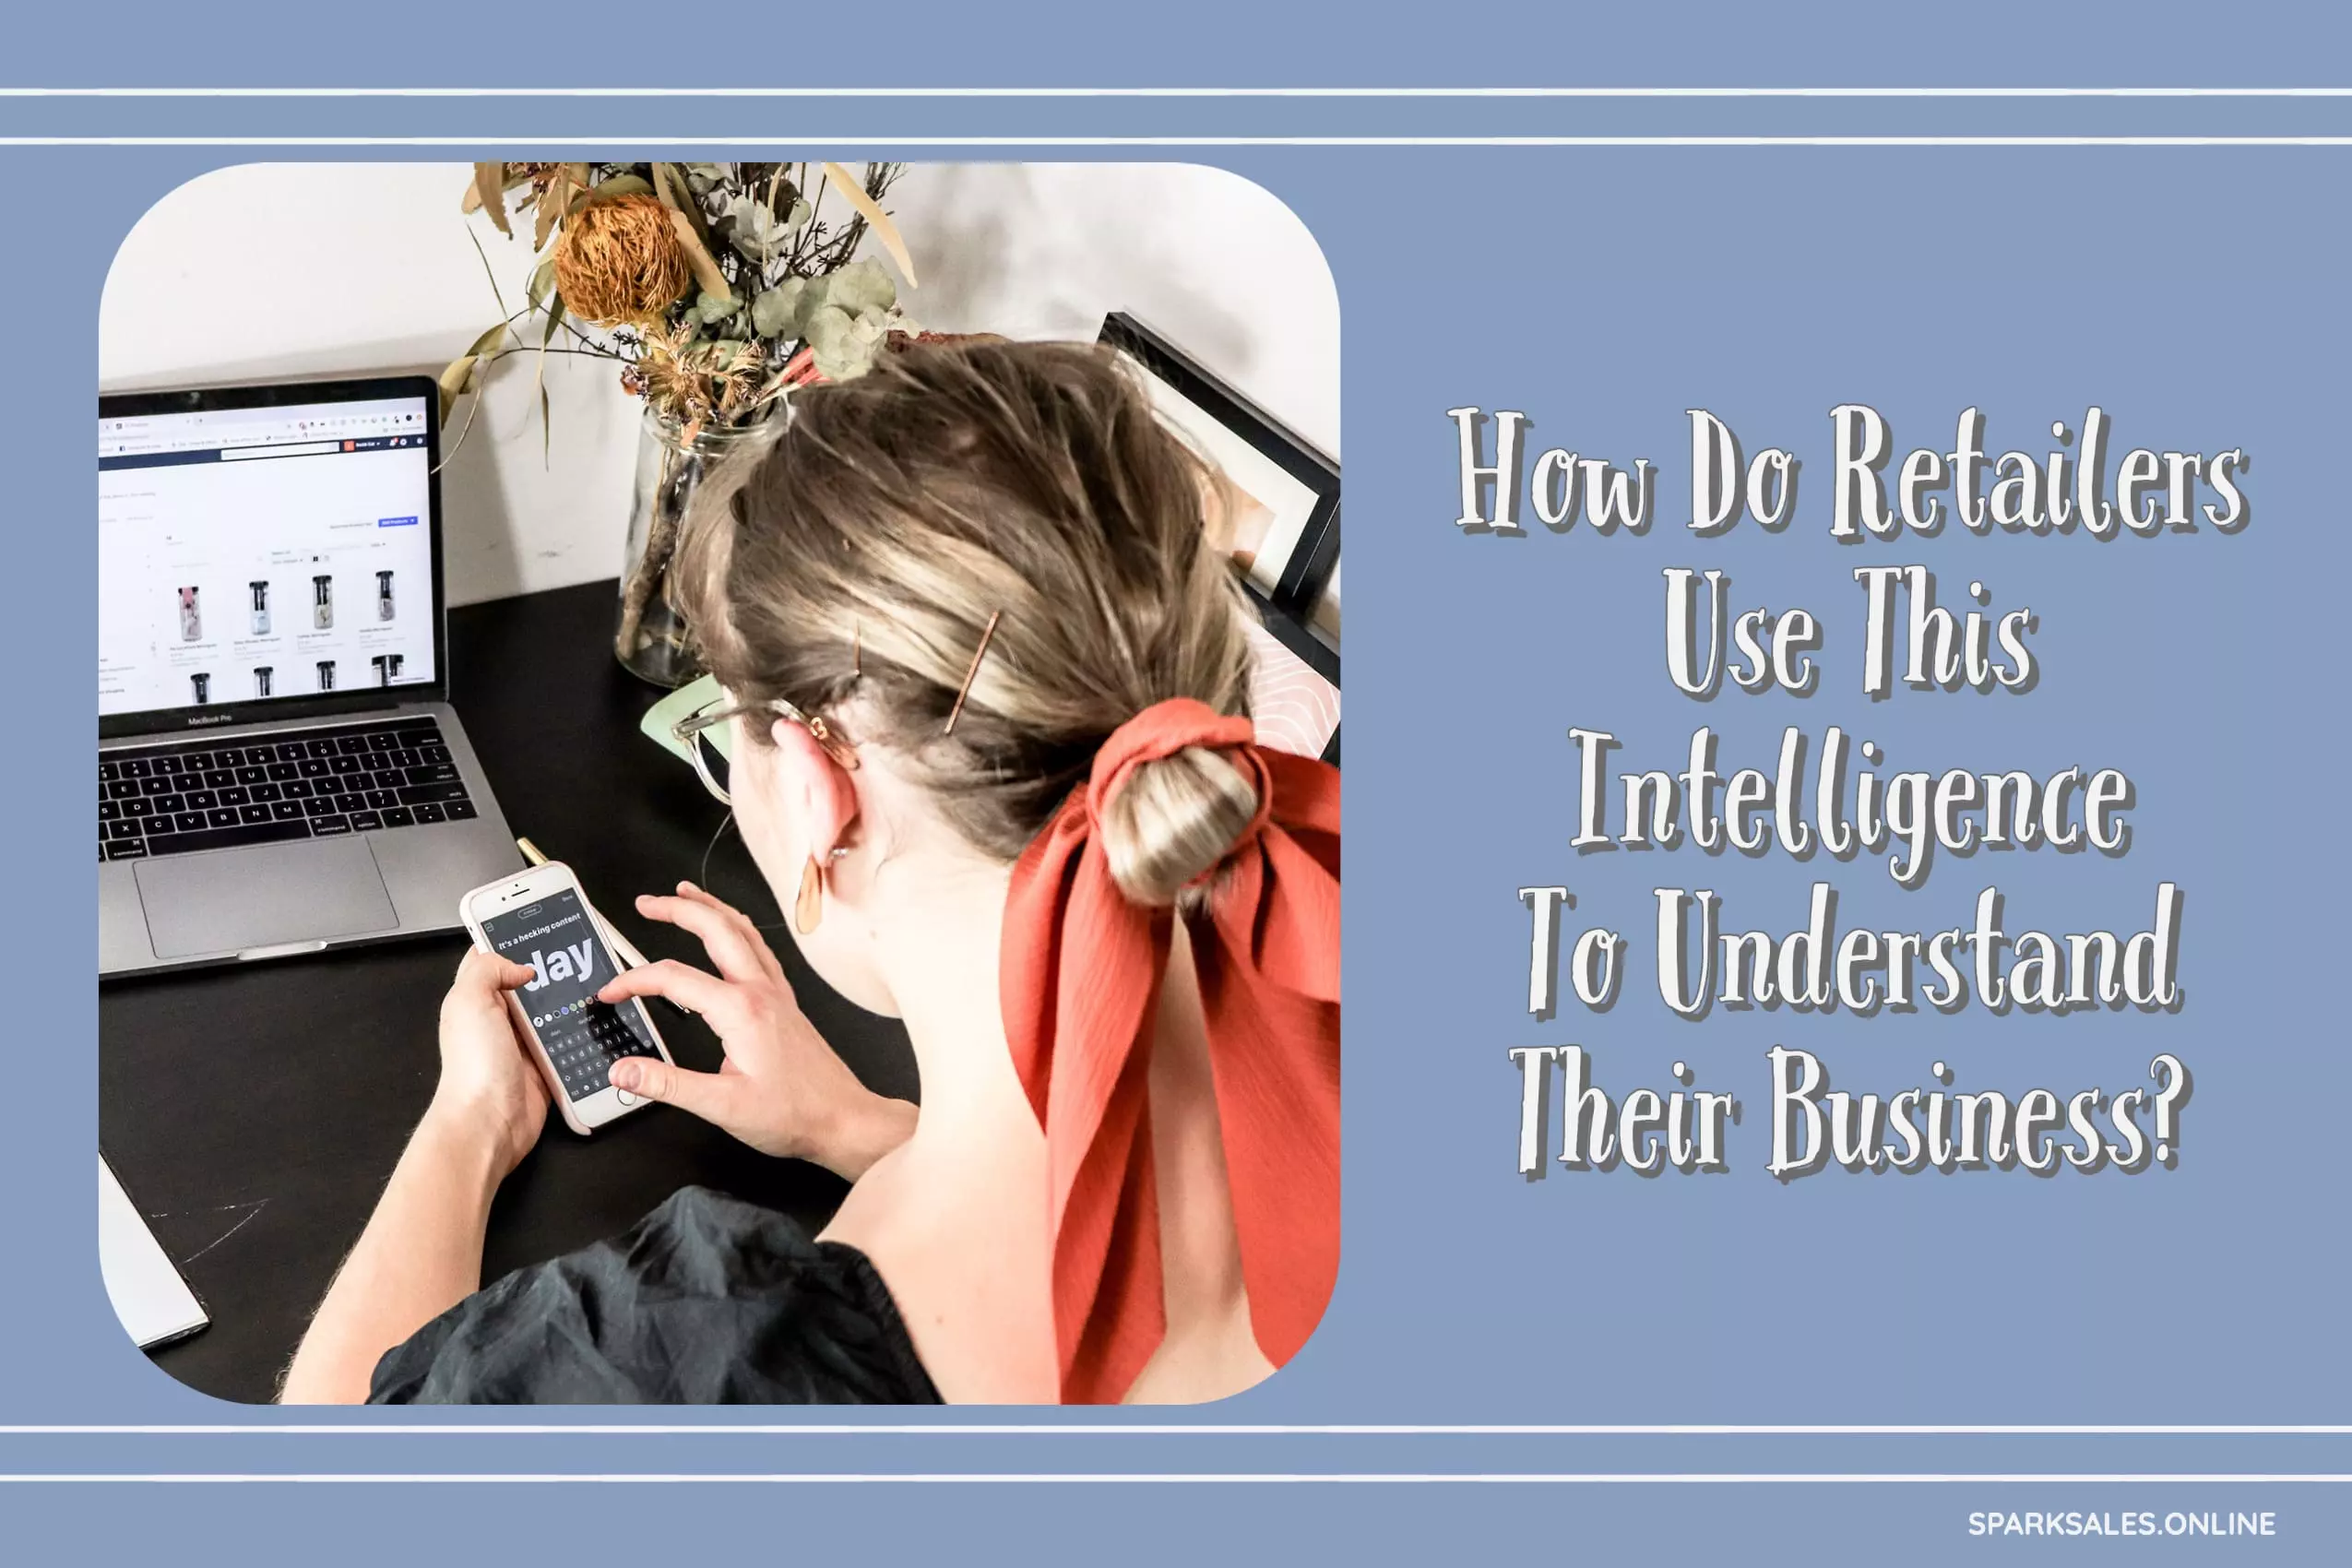 How Do Retailers Use This Intelligence To Understand Their Business?